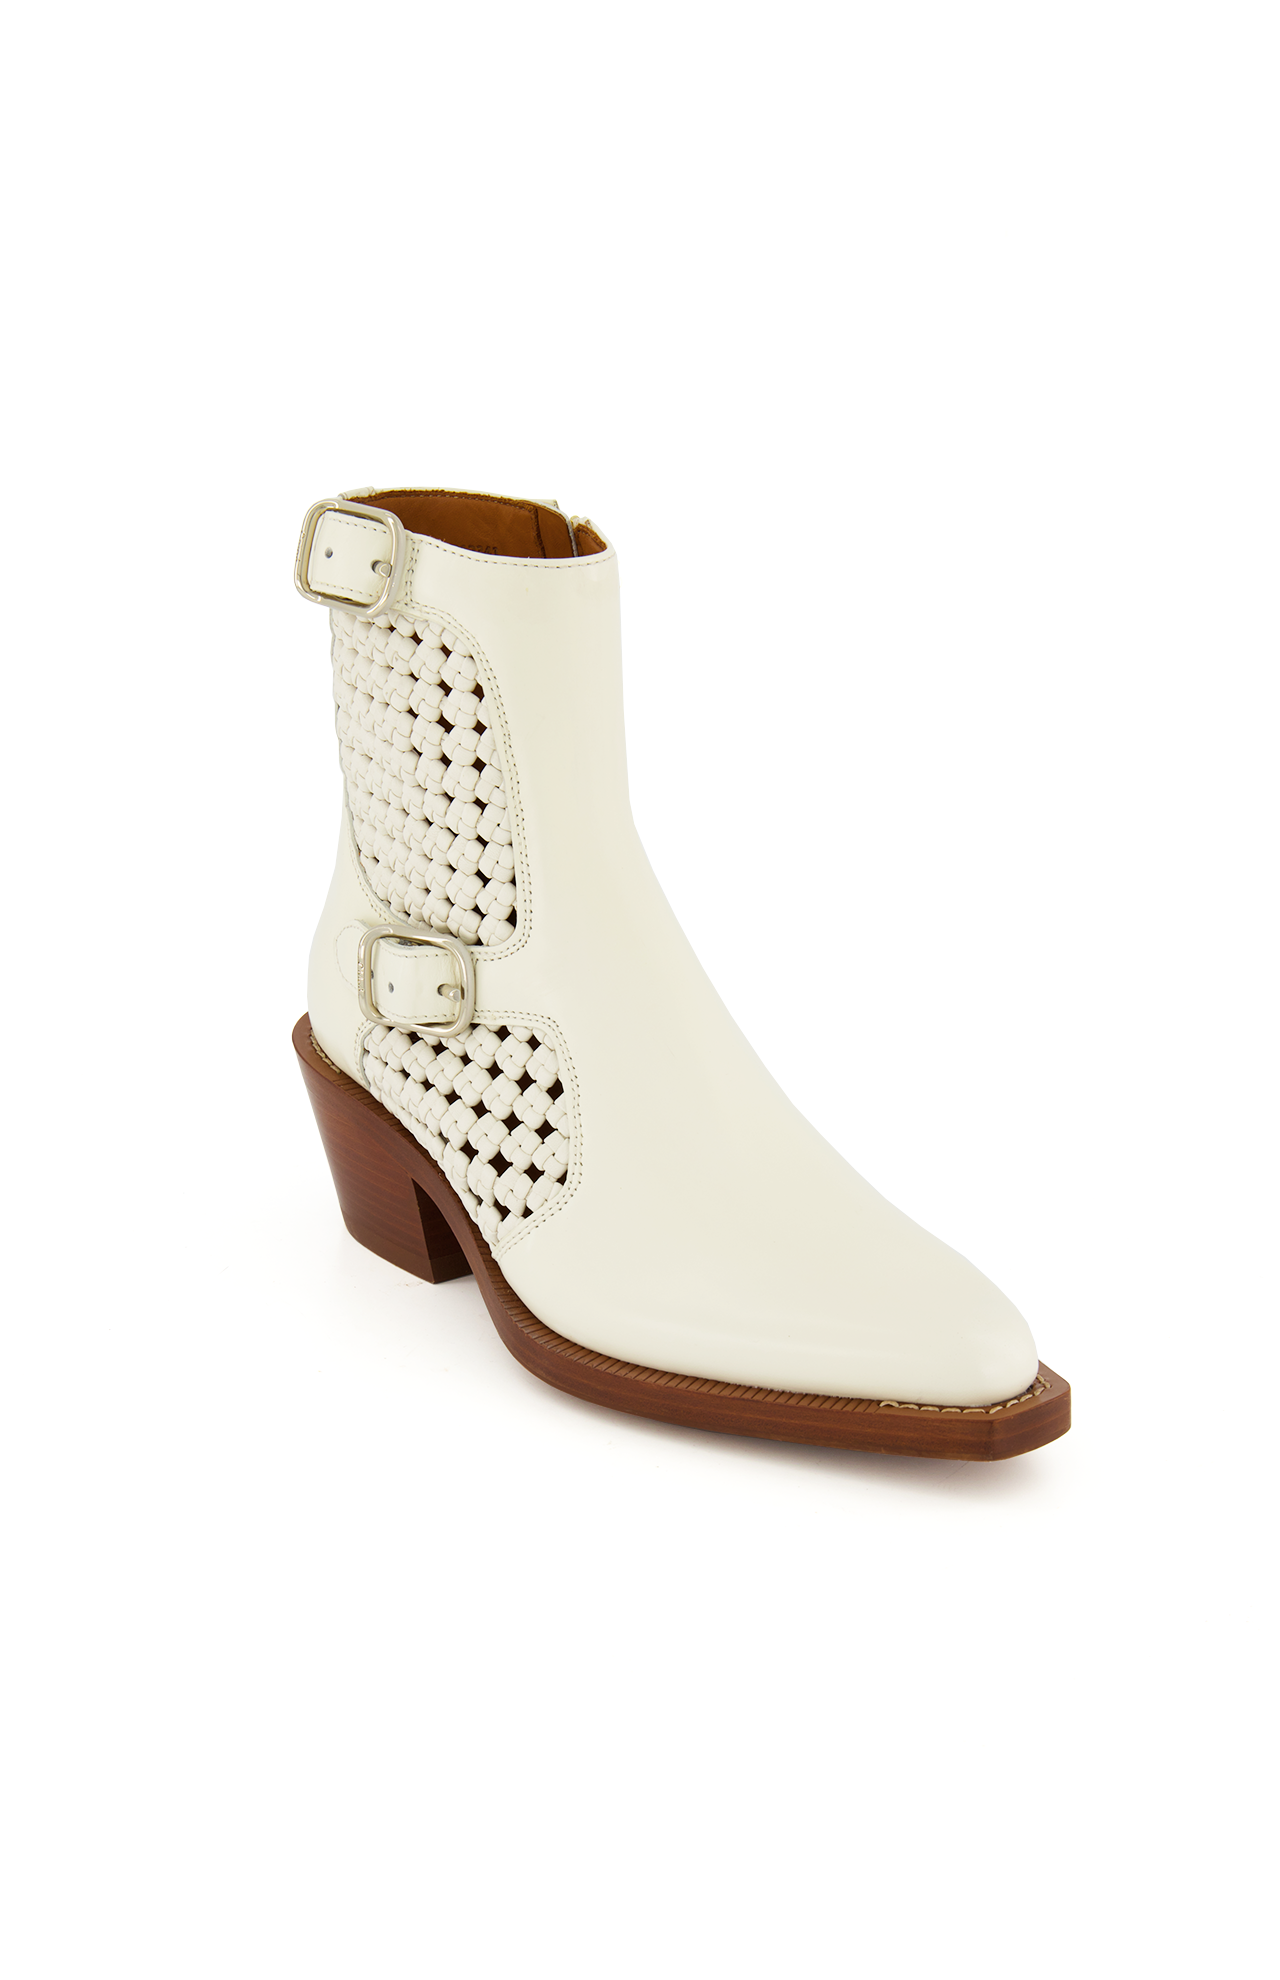 Chloe Nellie Boot Cloudy White Front Angled Image (7000318443635)